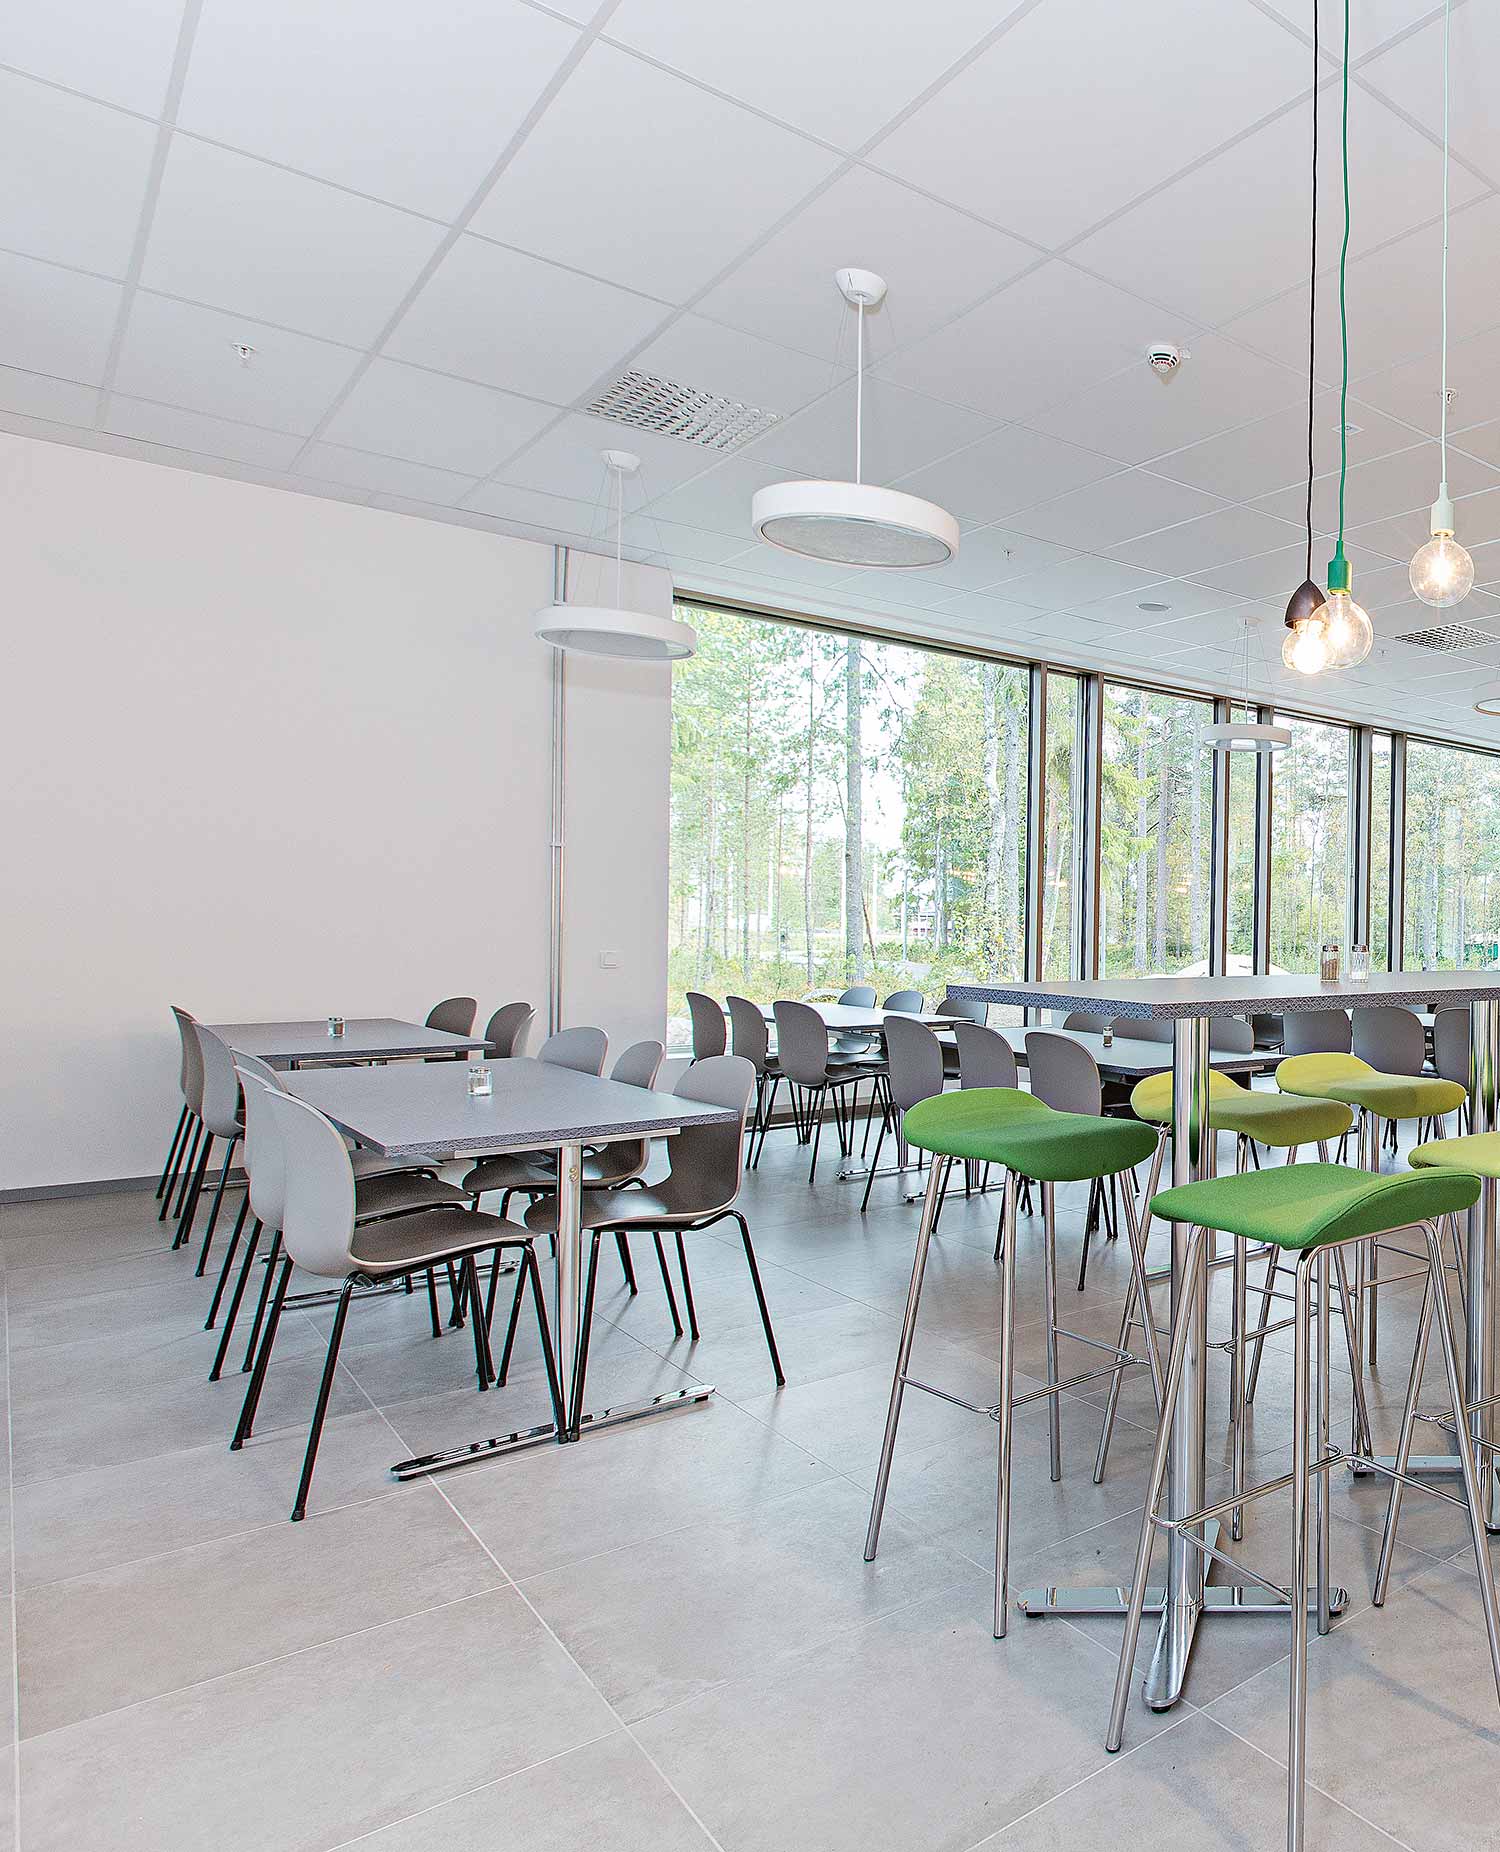 Light grey RBM Noor chairs in Minerva High School social area for eating